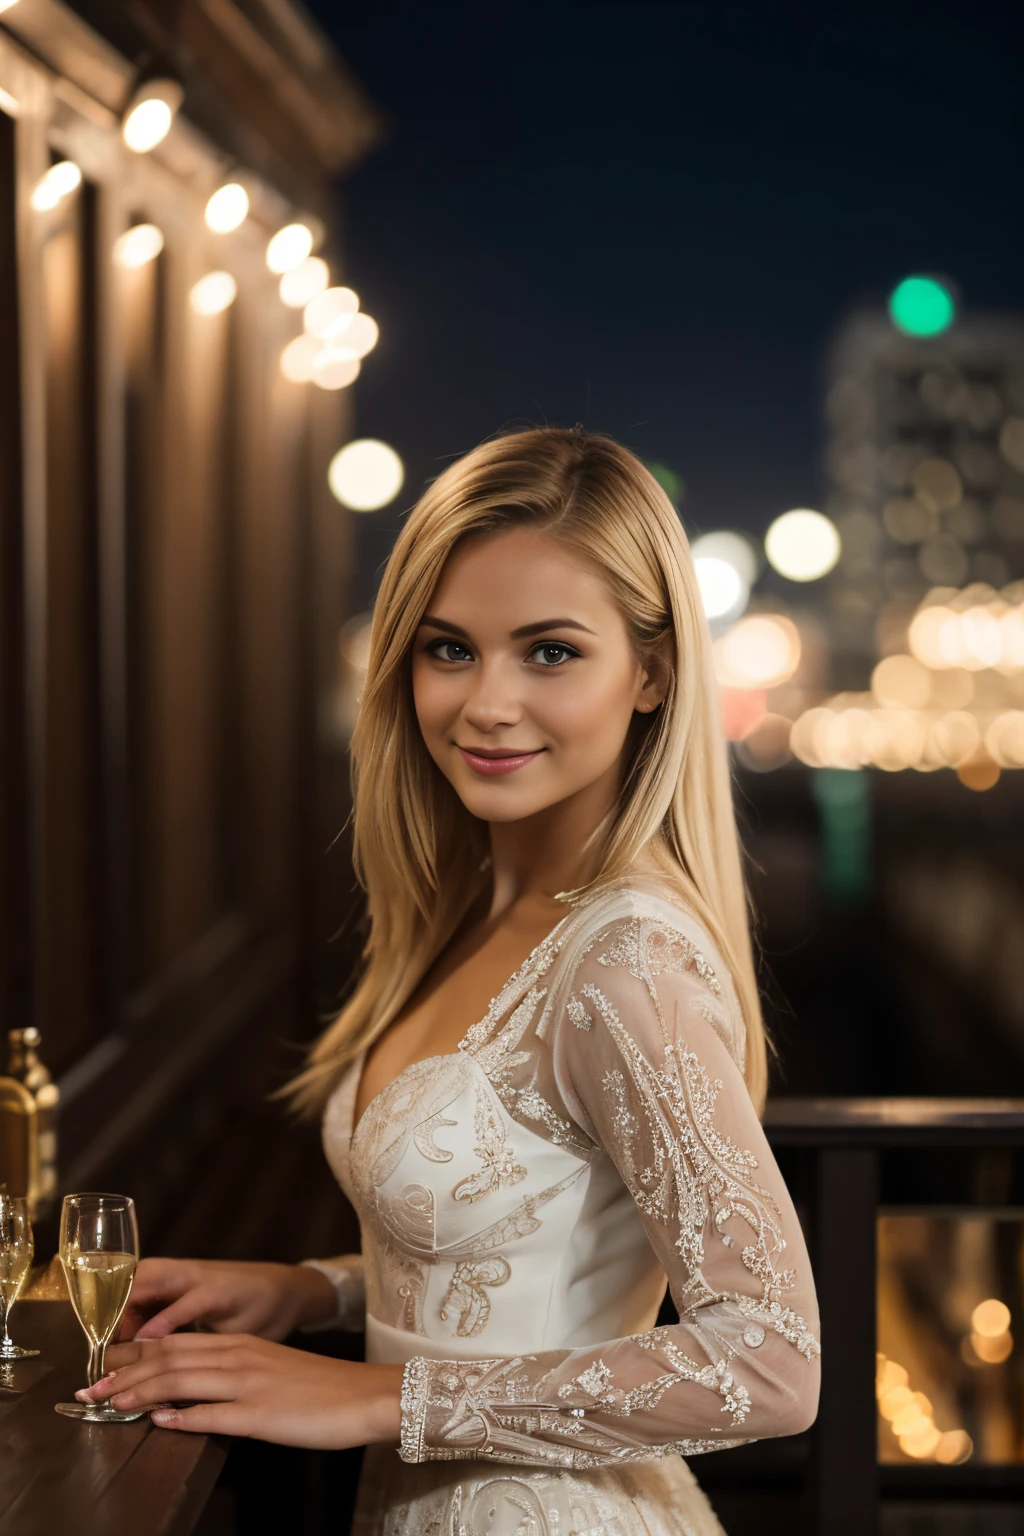 (Masterpiece), (extremely intricate:1.3),, (Realstic), Portrait of a 25-year-old European woman,gorgeous blonde, Outside night light, on an outdoor bar on the roof of a building in a city drinking a glass of champagne, Night Lights, professional photograph of a stunning woman detailed, sharp focus,, dramatique, award winning, lighting cinematic, Rendu octane, Moteur Unreal, volumetrics dtx, (grain du film, Bokeh, premier plan flou, blured background), very well dressed, subtle smile, flirts with the camera